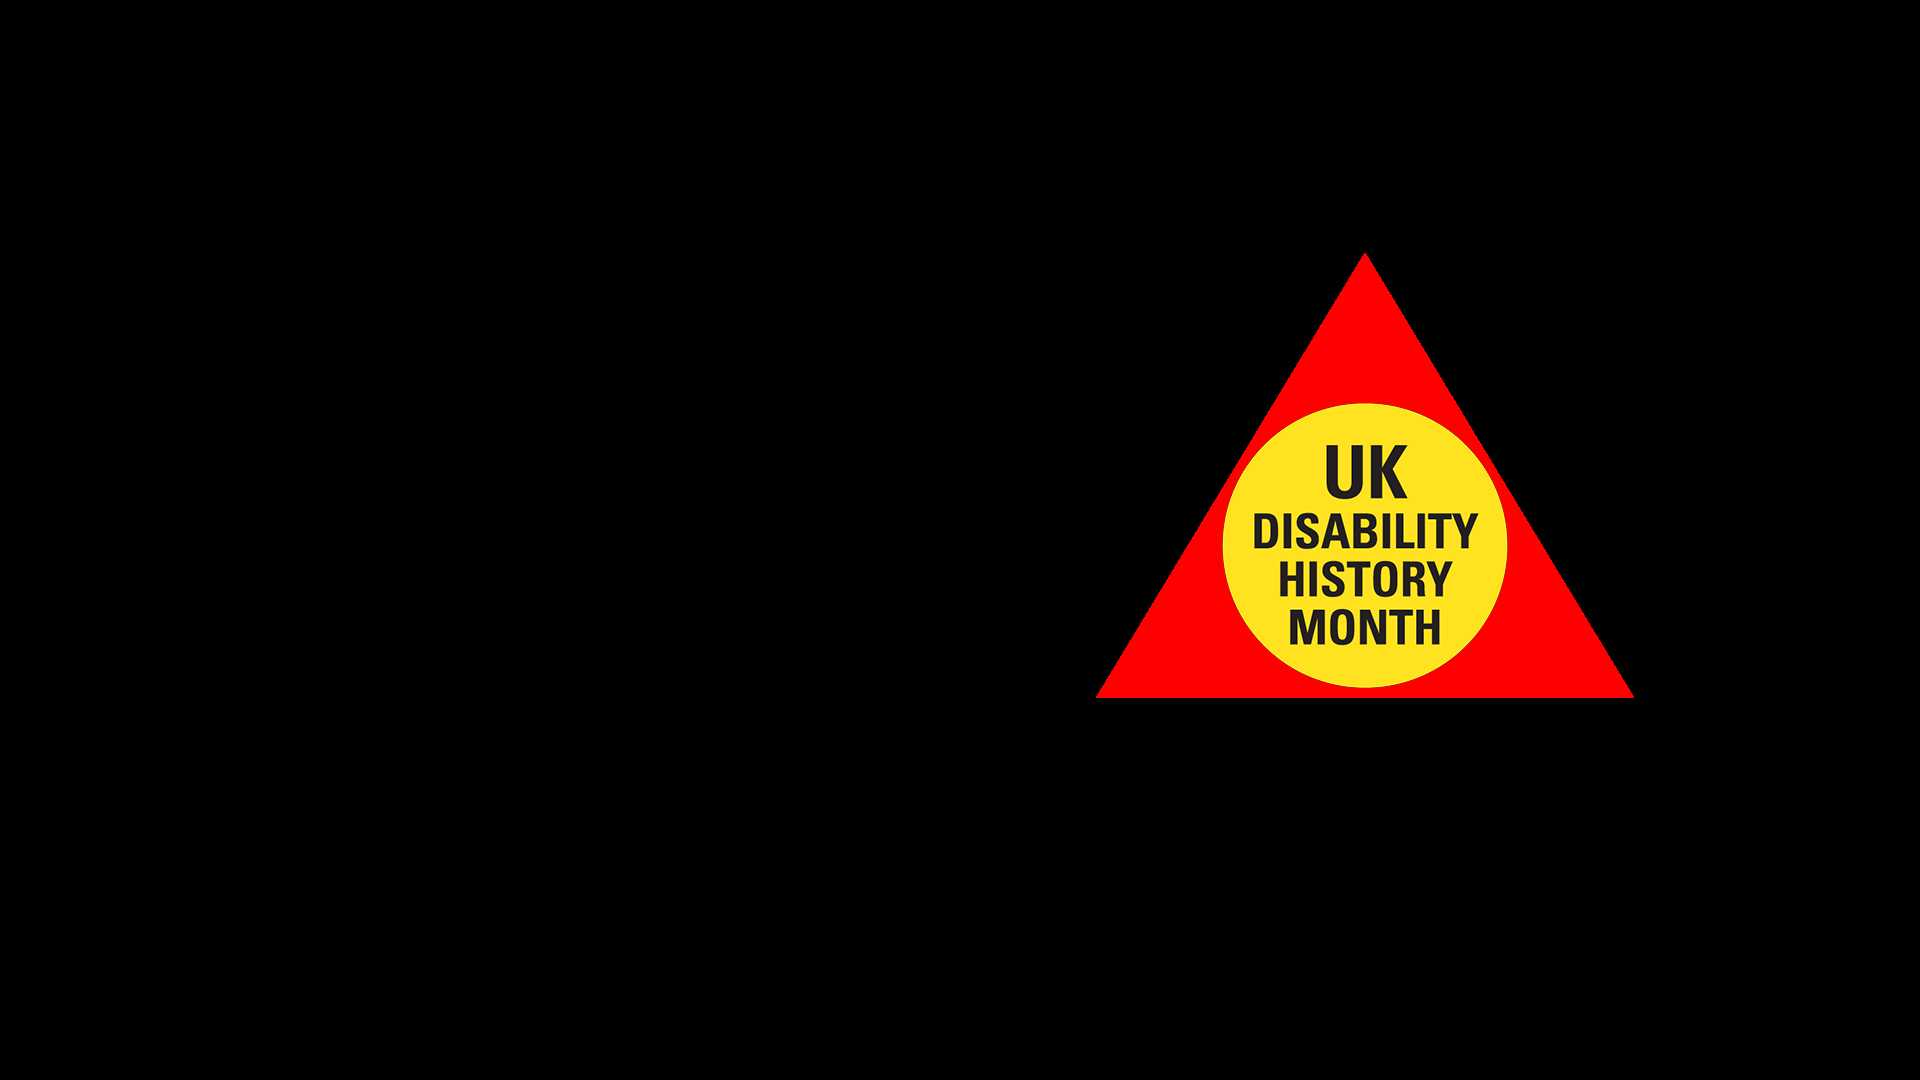 Disability history month logo